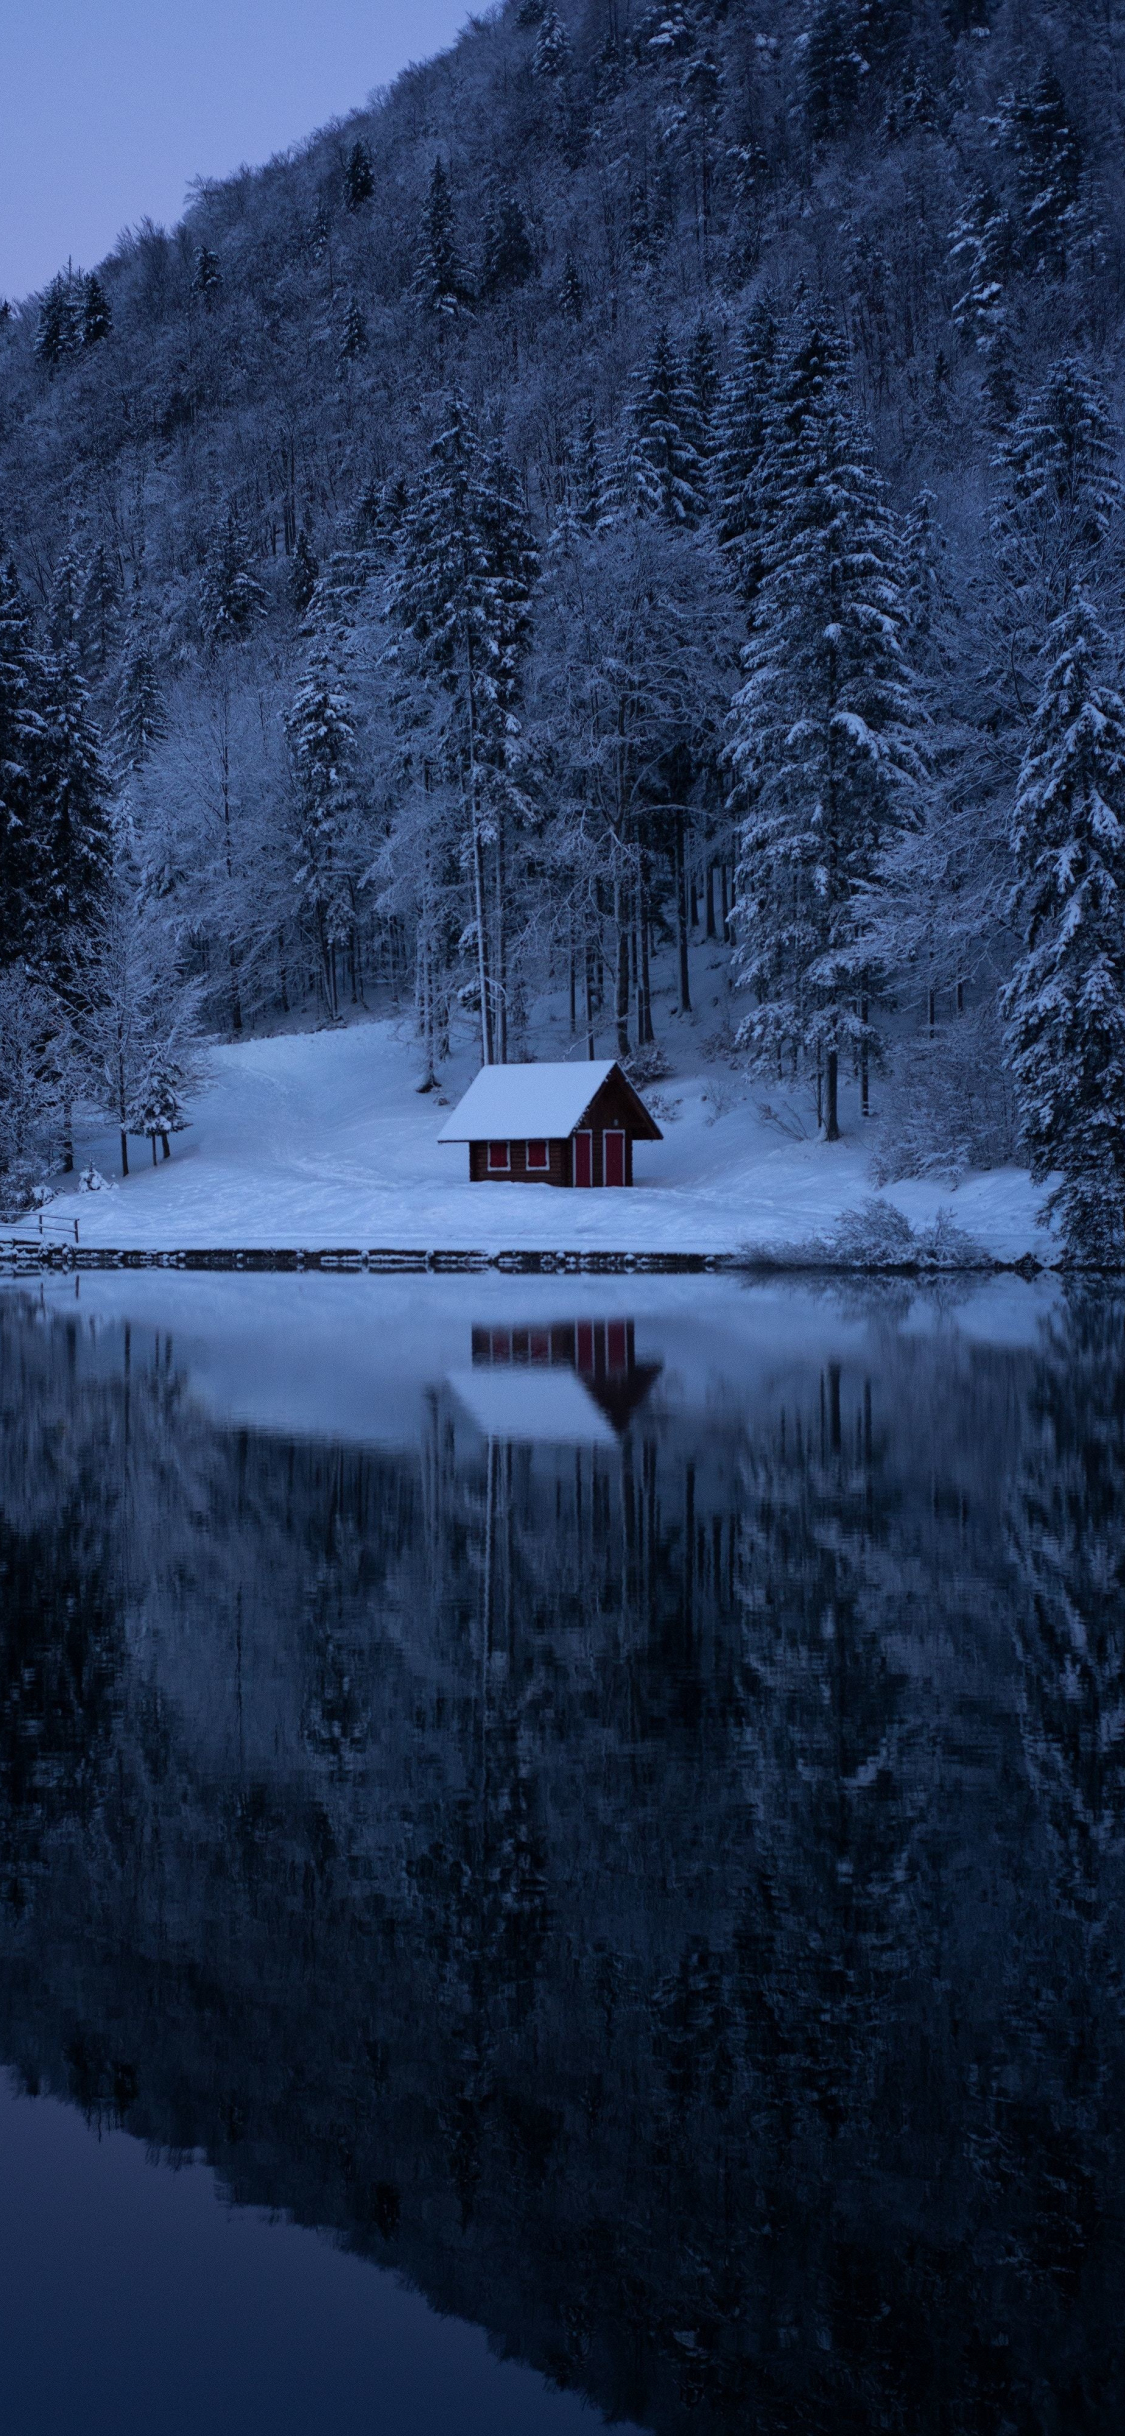 Download 1125x2436 wallpaper winter, lake, house, evening, nature, iphone x 1125x2436 HD image, background, 15021